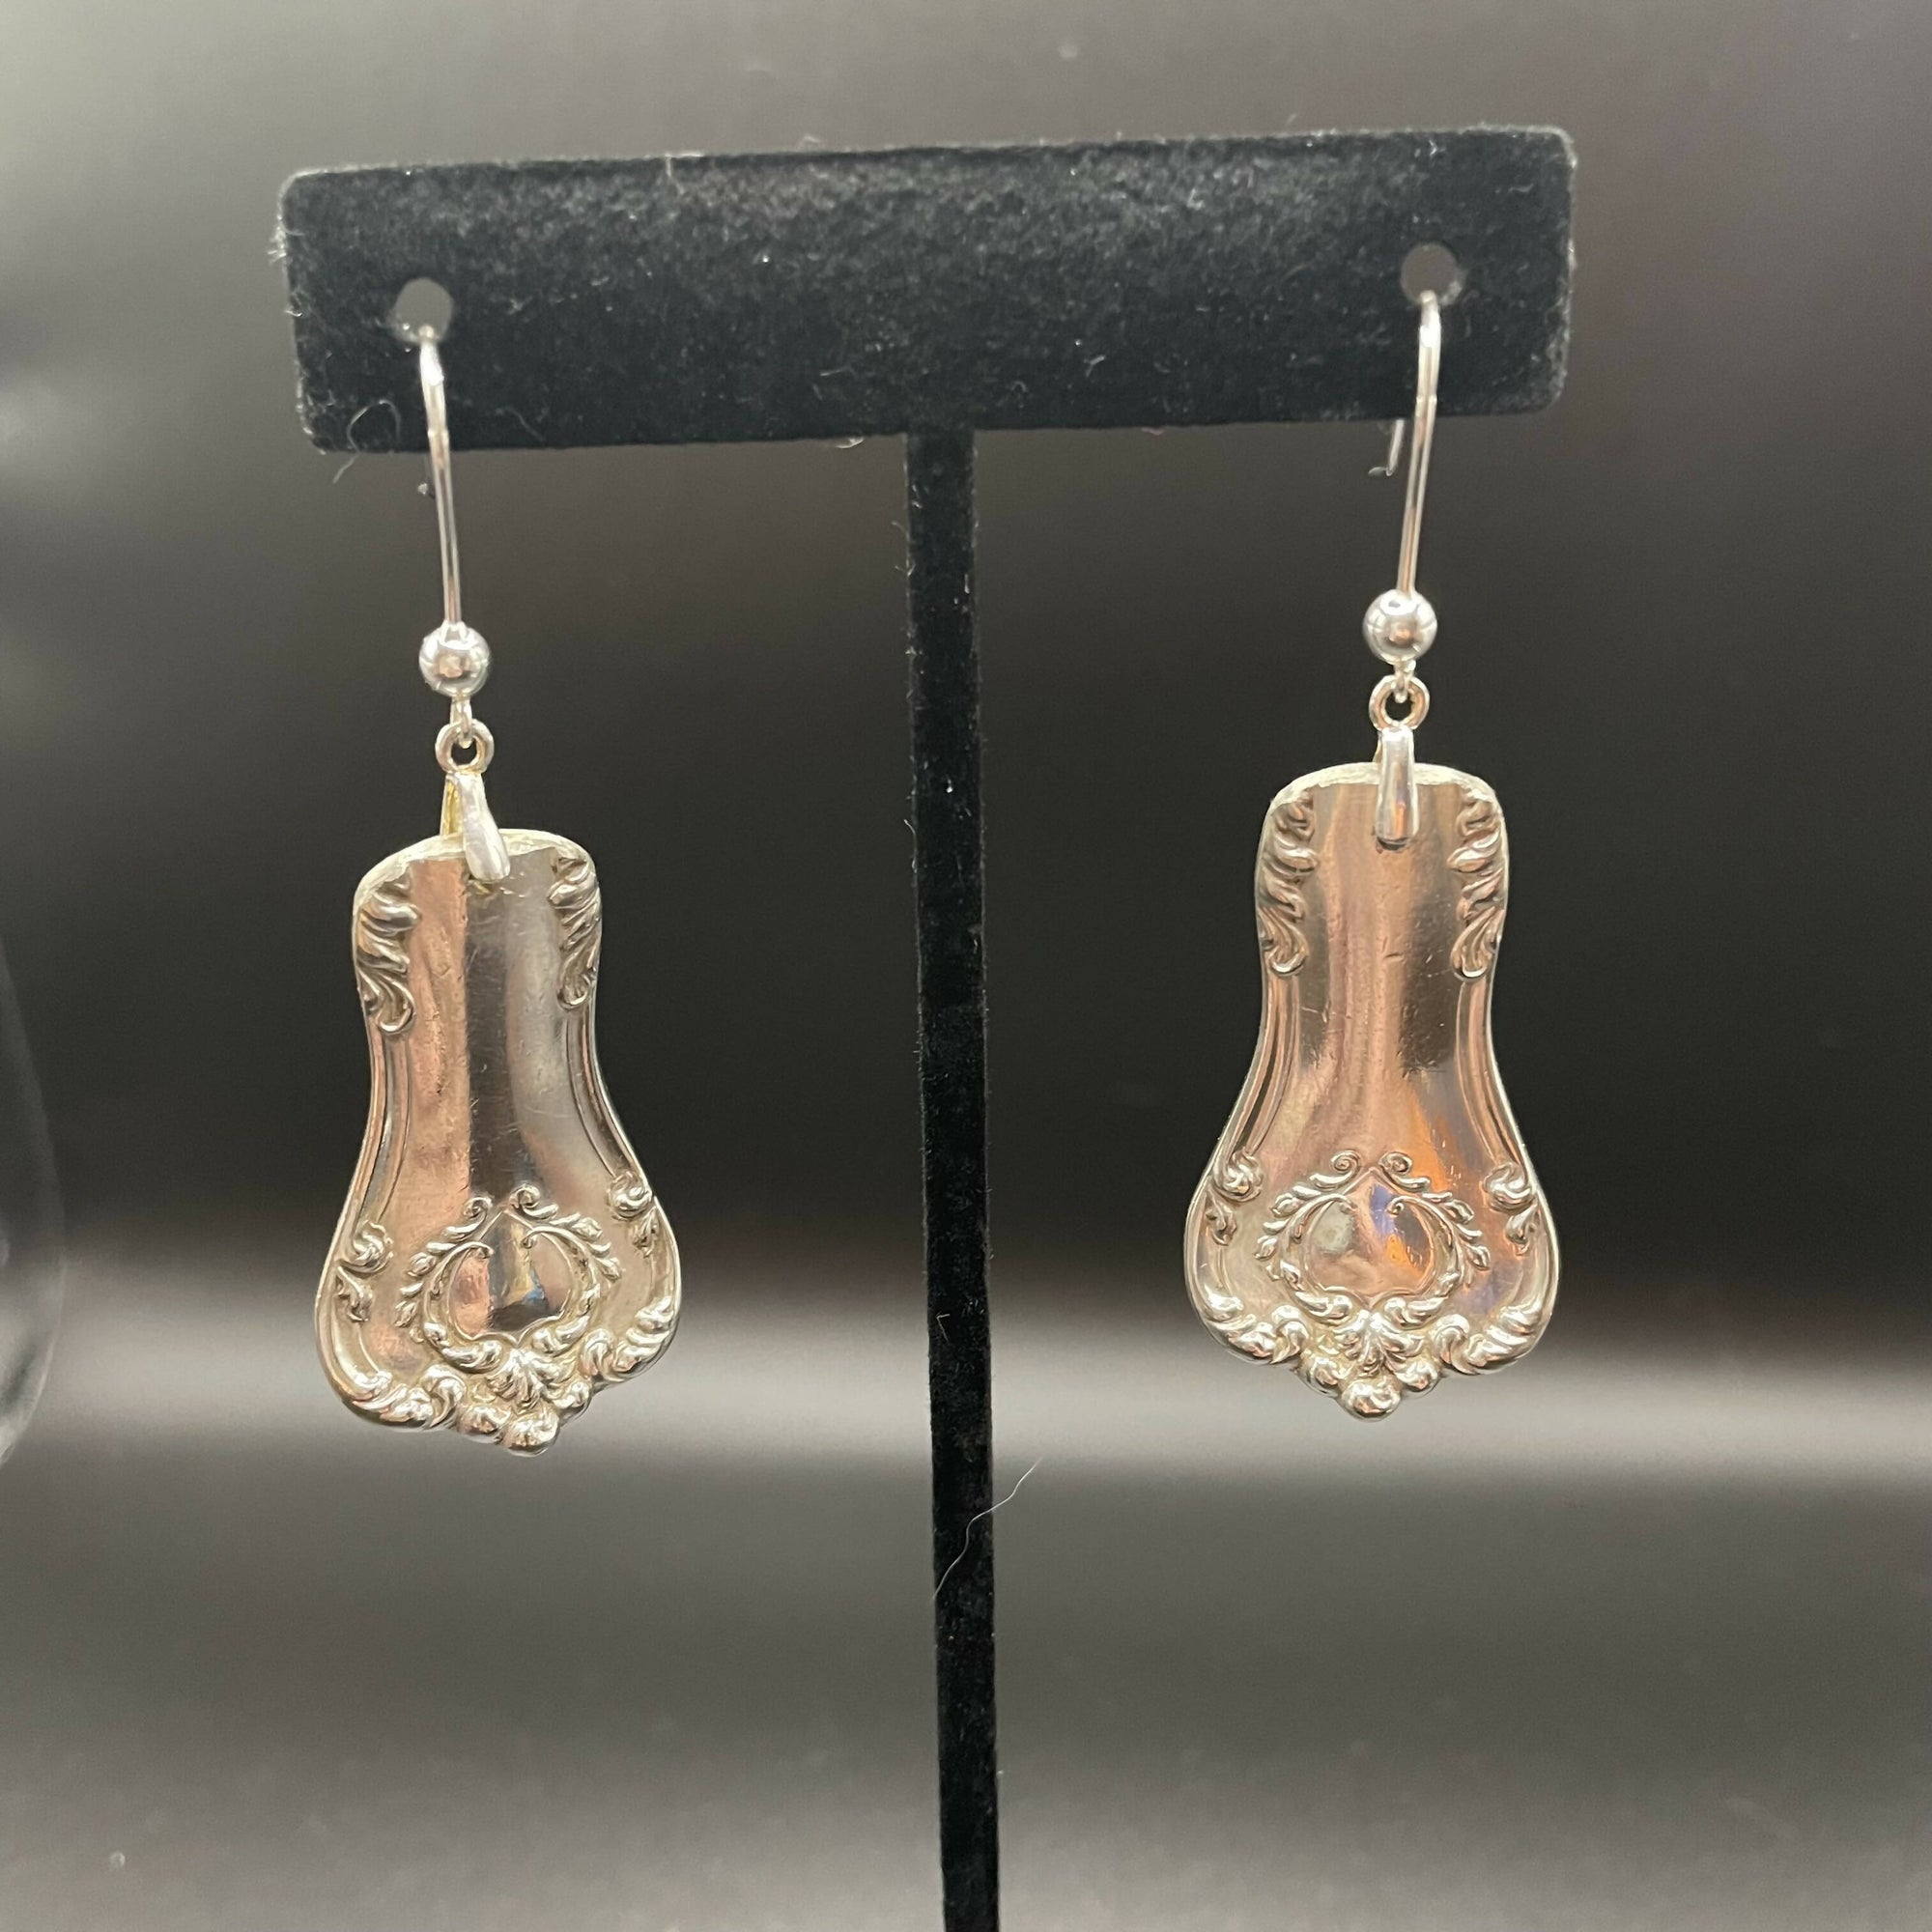 Repurposing By Glenna | Hour-Glass Shaped Floral Silver Spoon Earrings